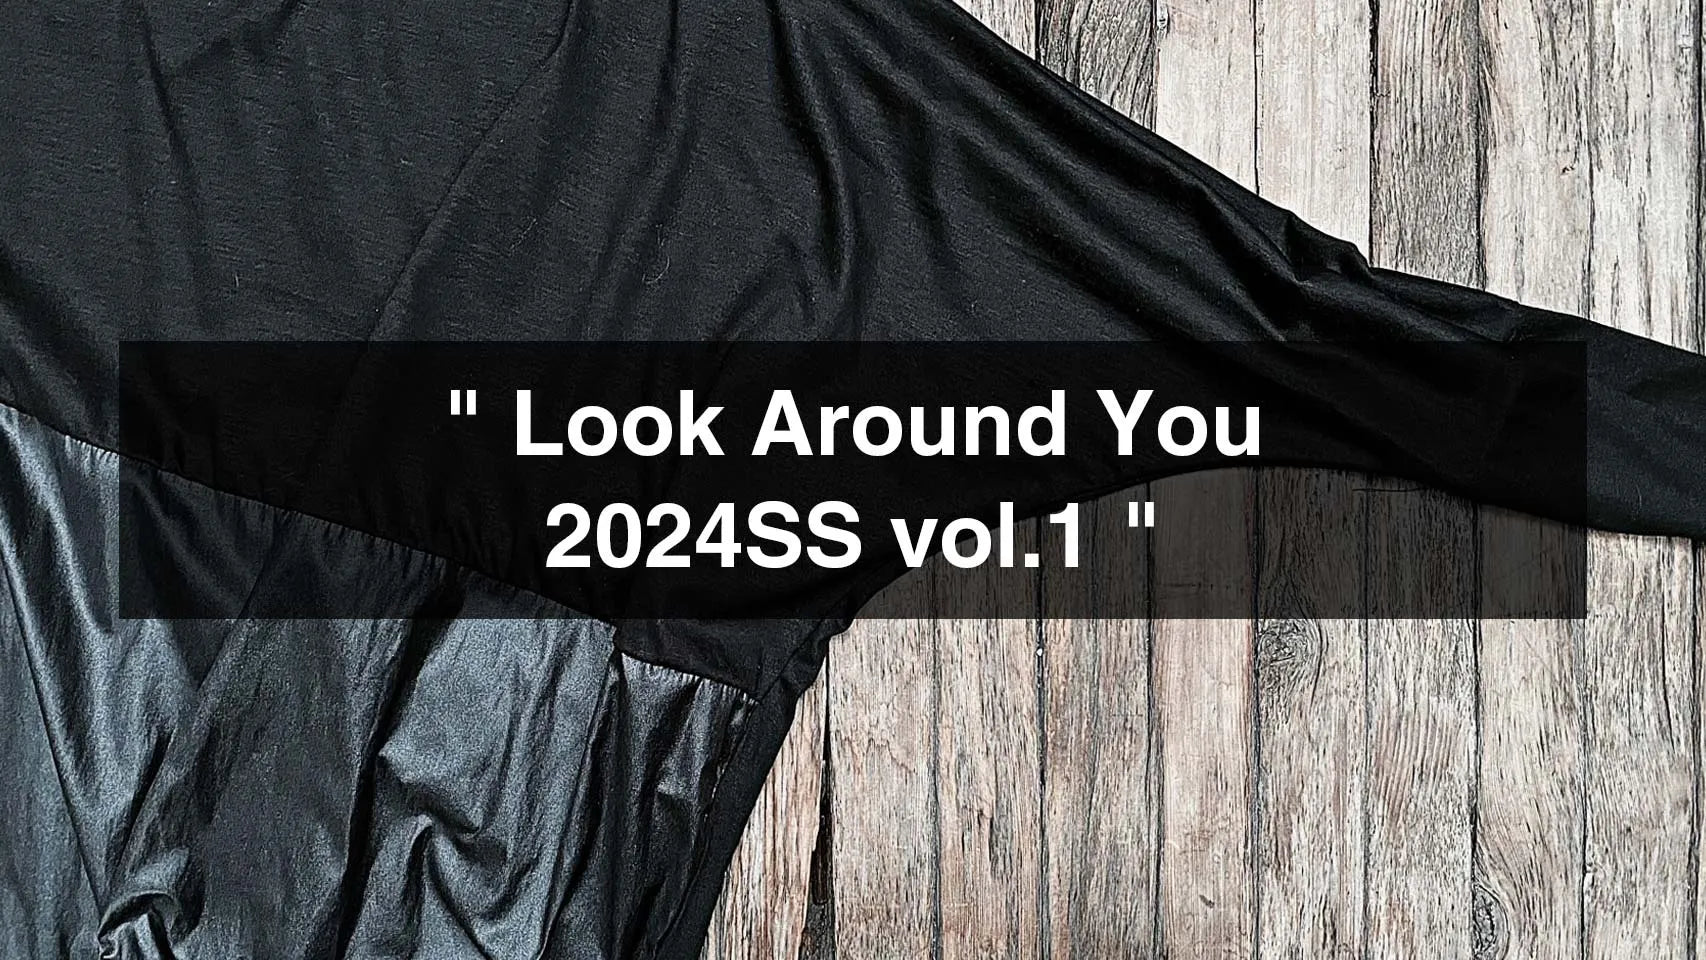 Look Around You 2024SS vol.1